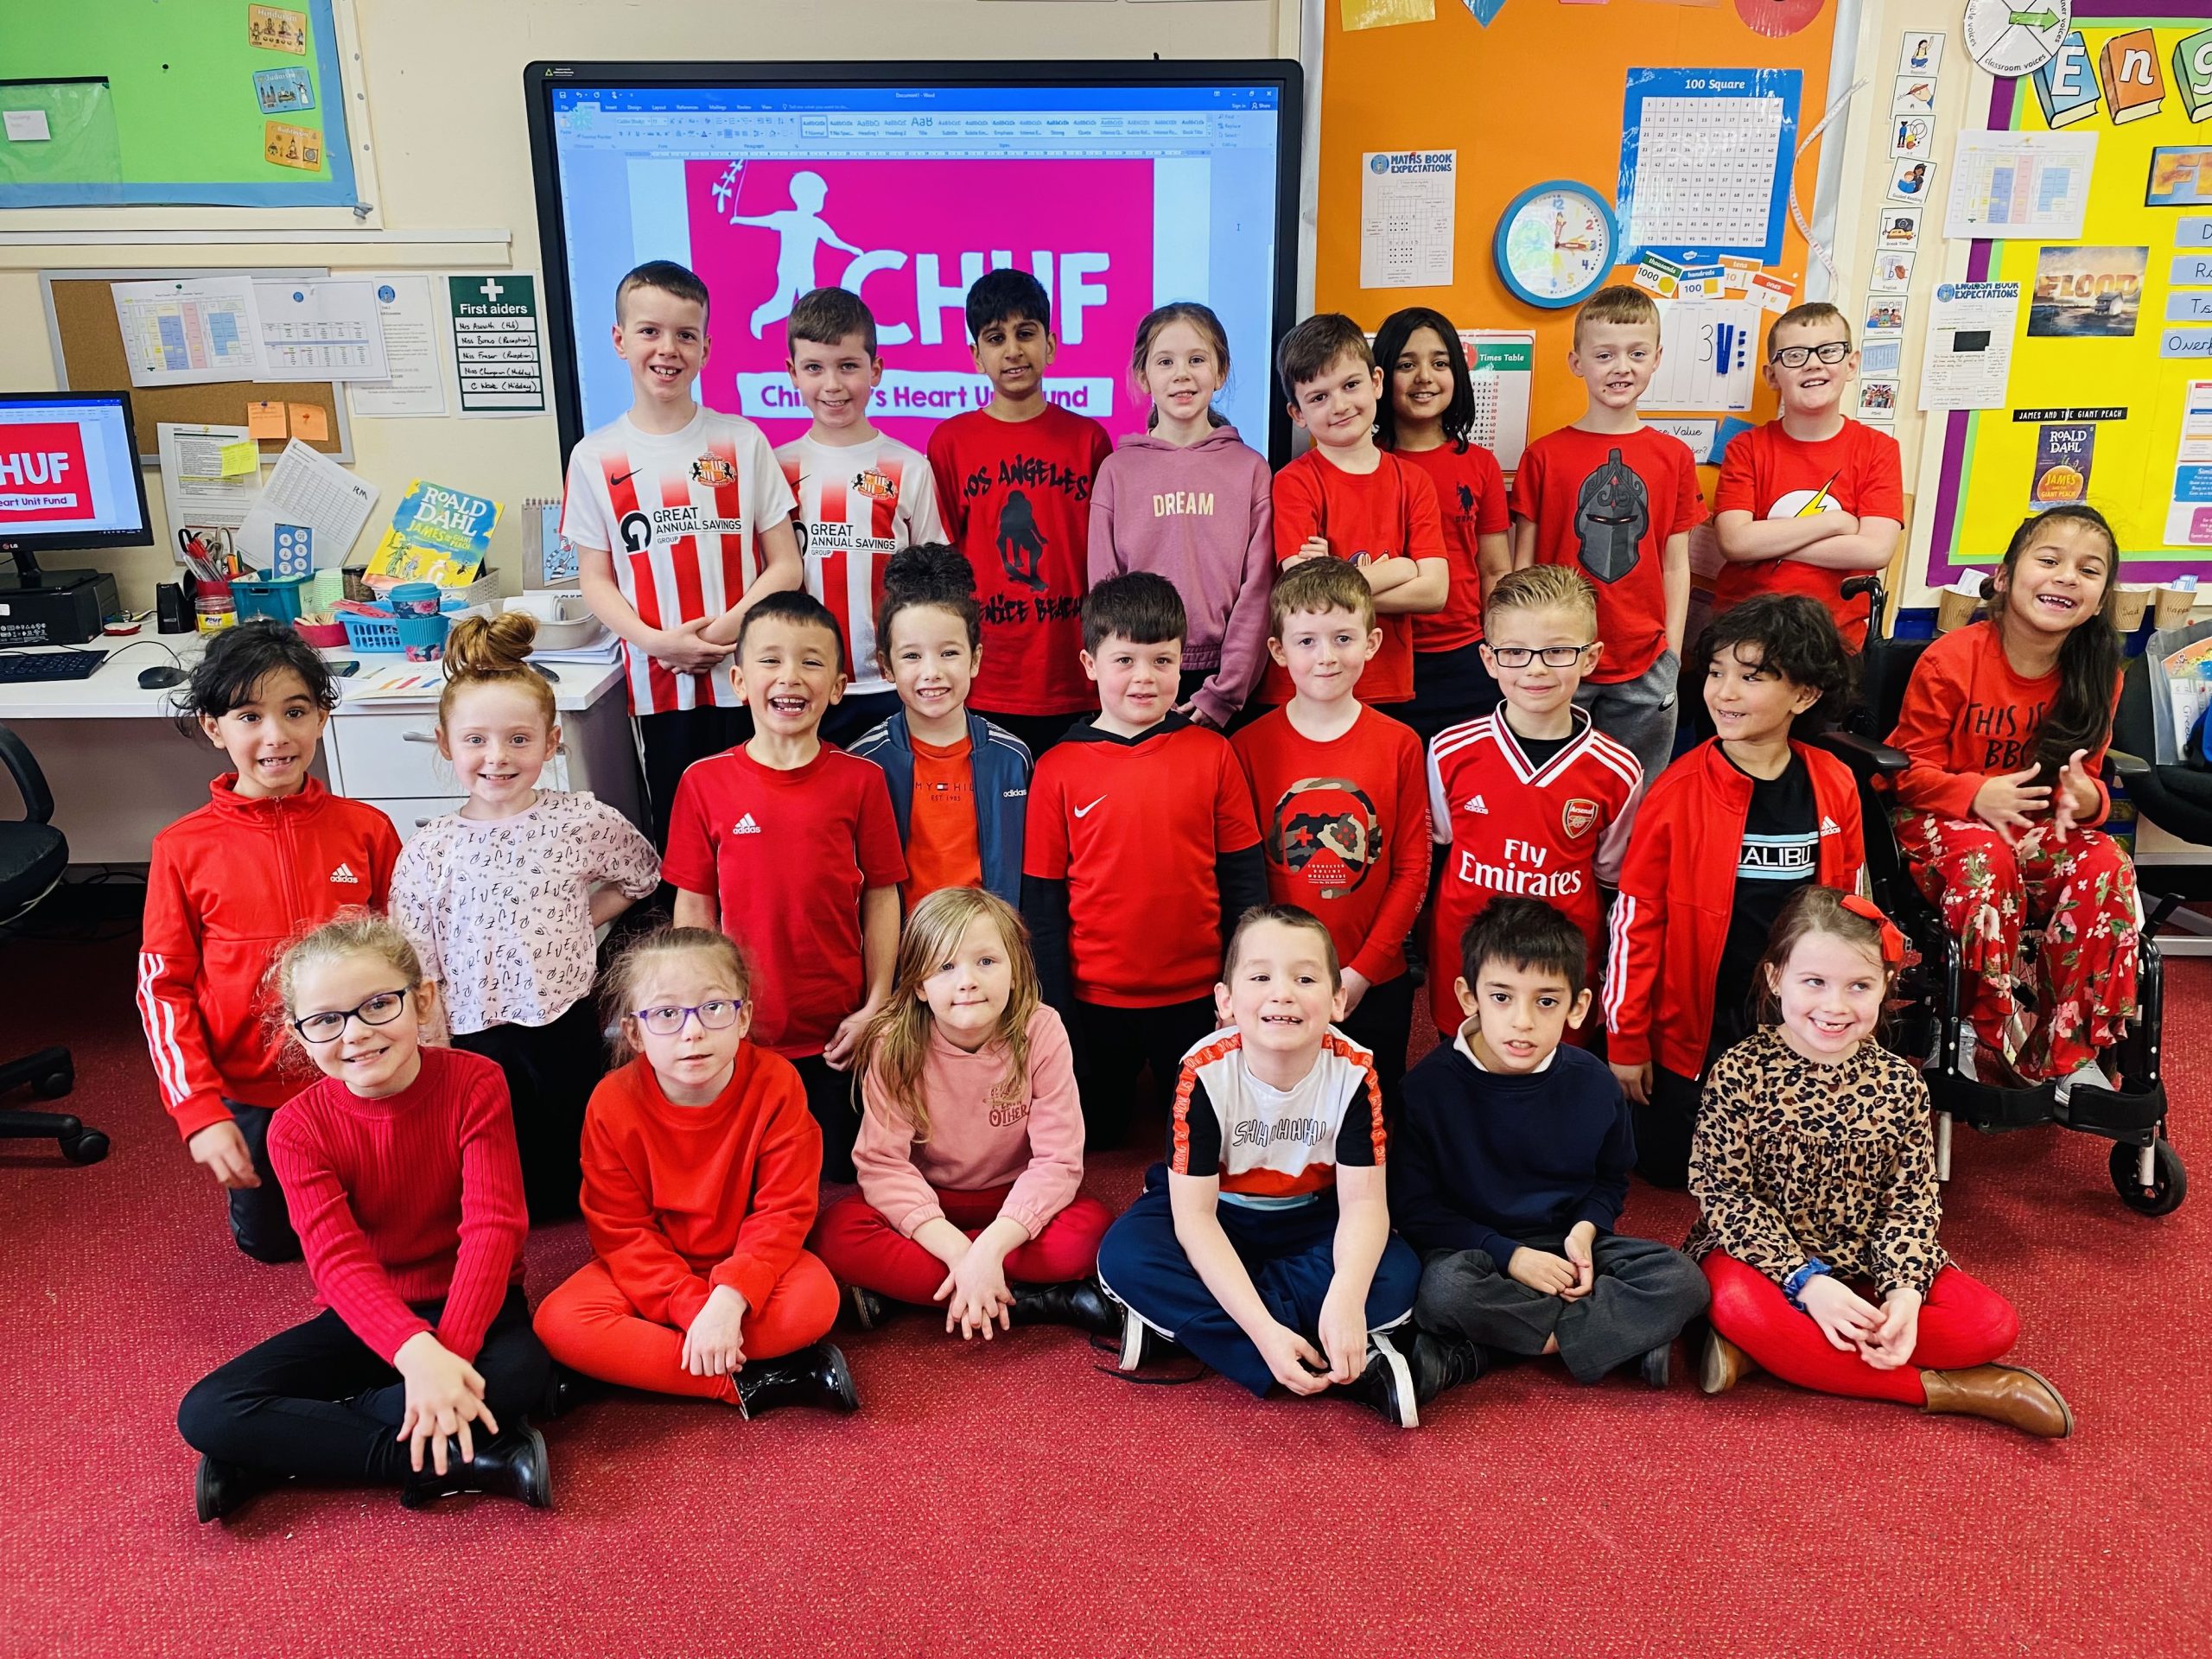 Year 3 children wearing red for CHUF